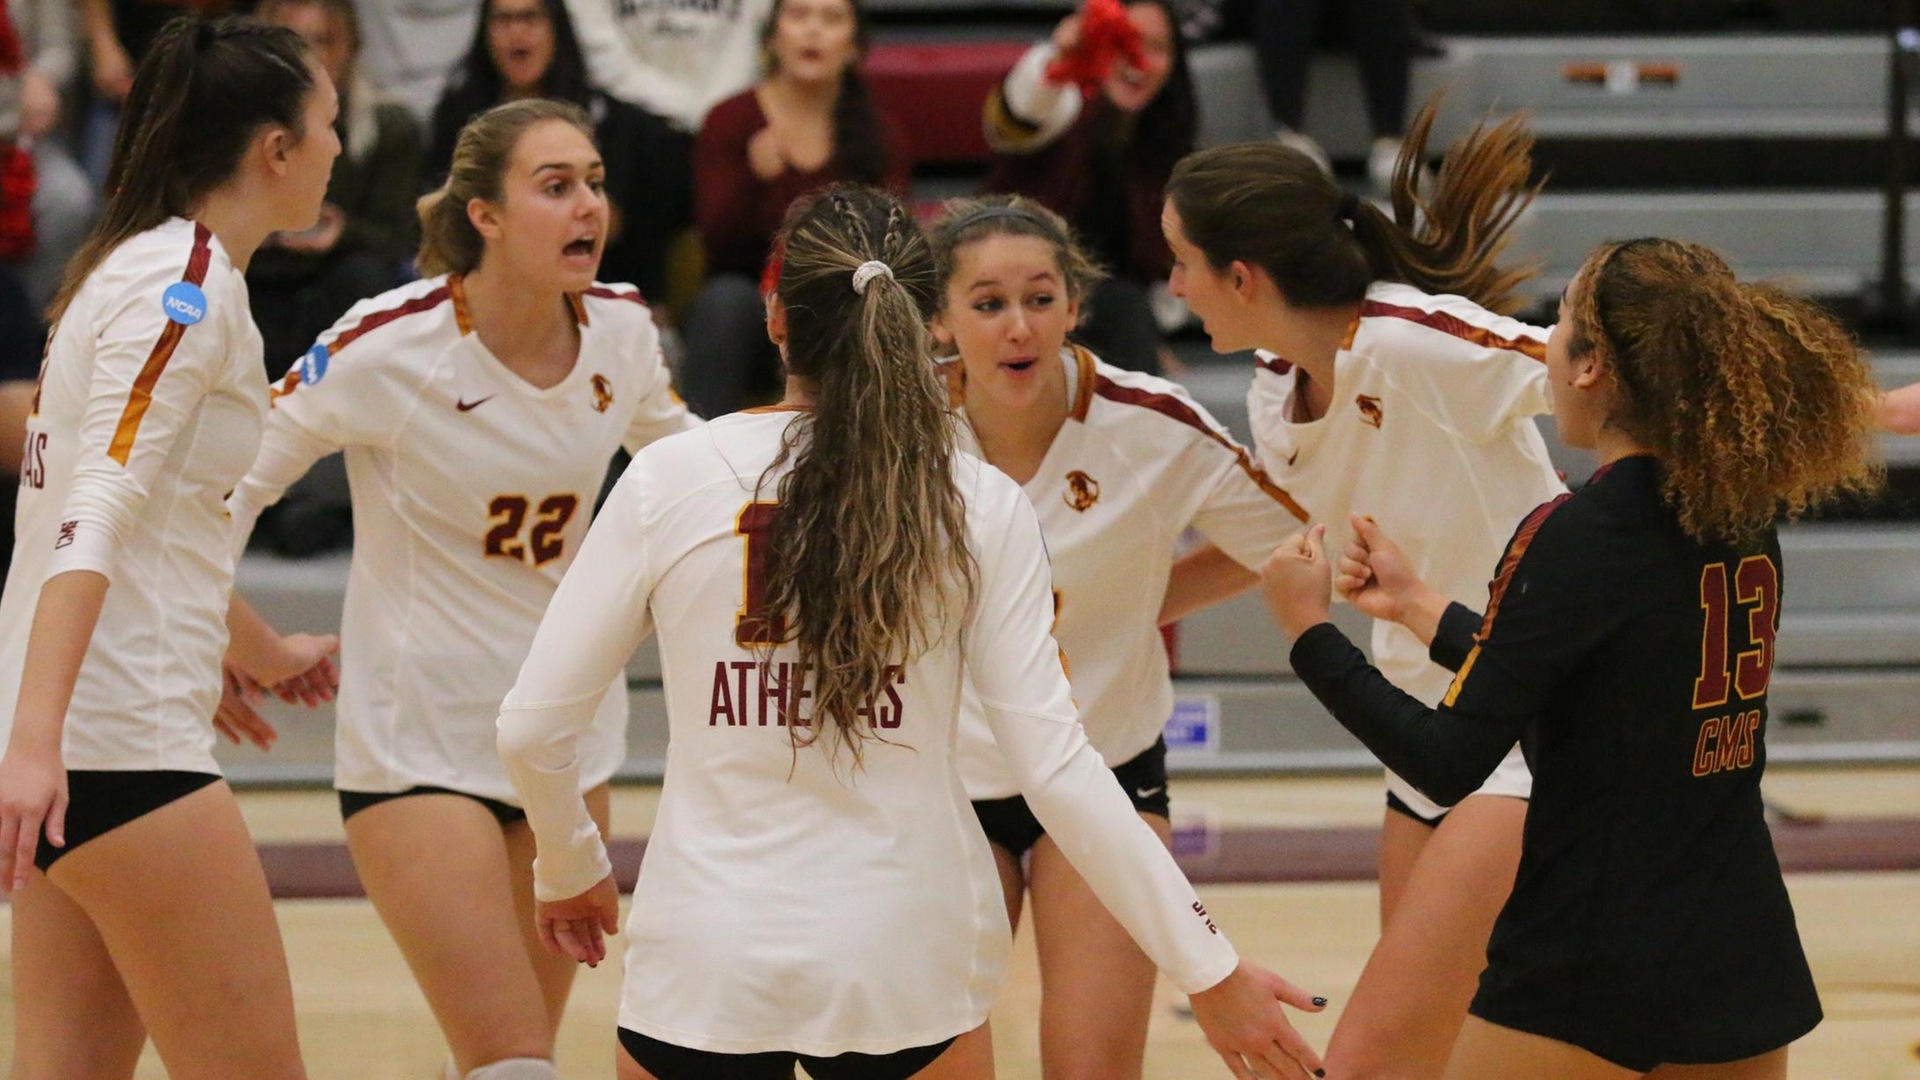 Athenas Volleyball 2022 Season In Review